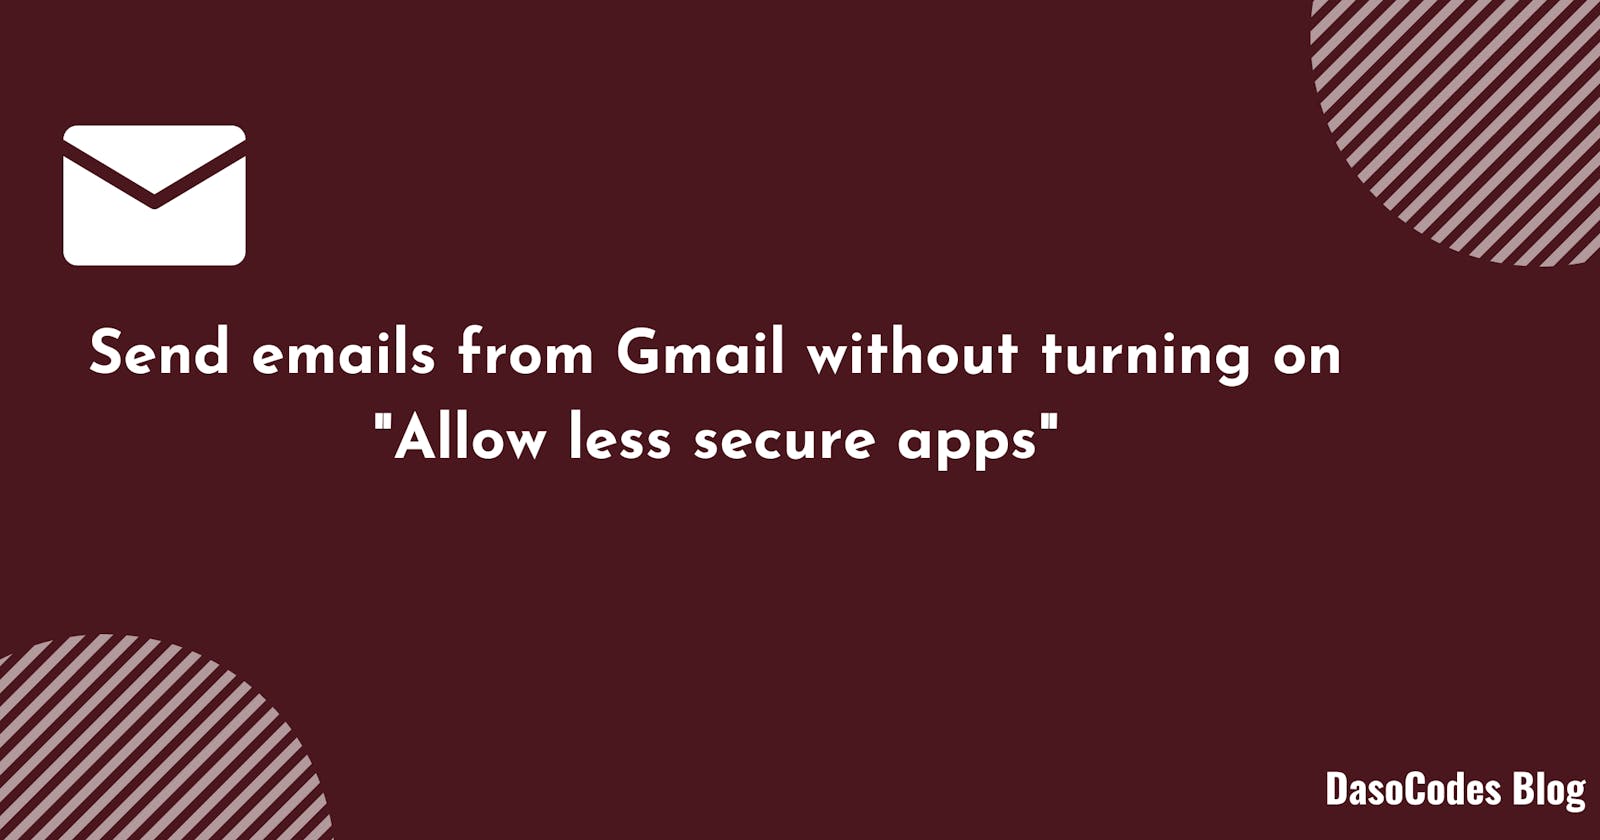 Send emails from Gmail without turning on "Allow less secure apps."